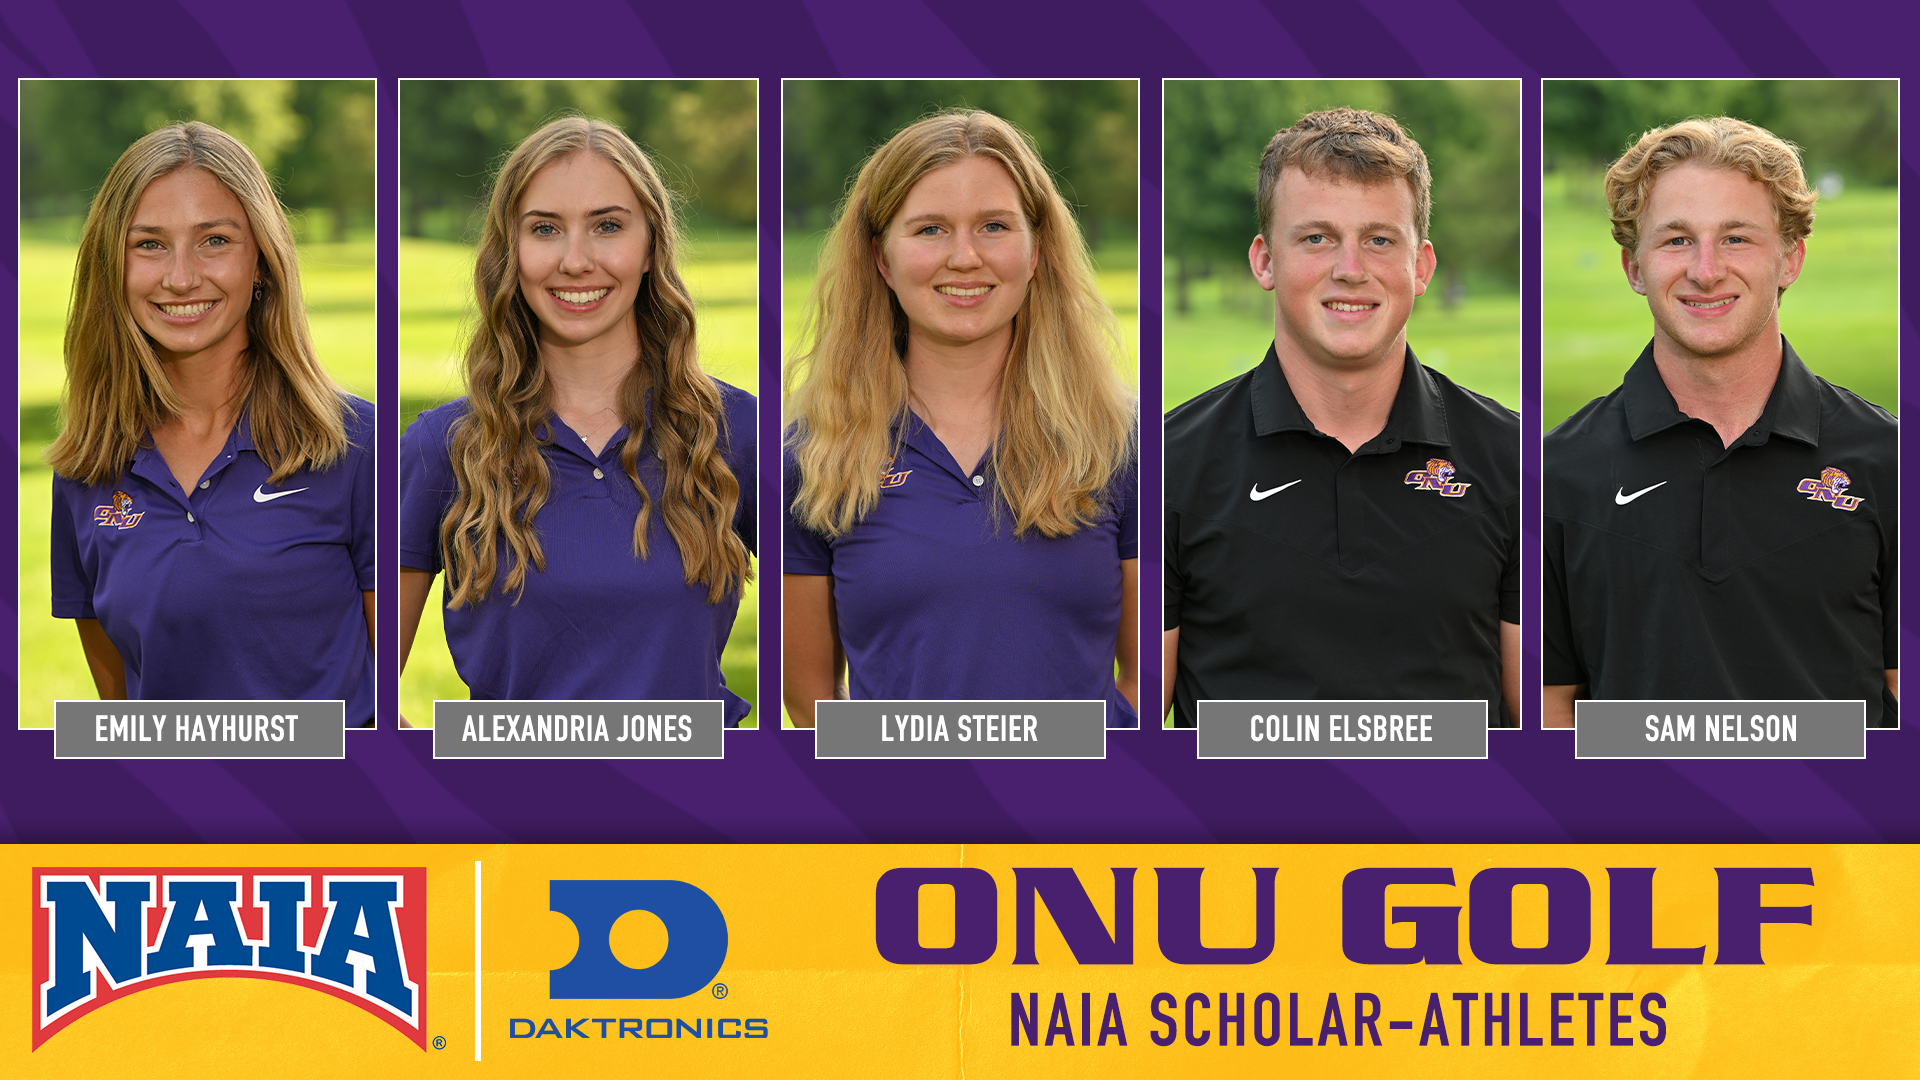 ONU GOLF LANDS FIVE ON NAIA SCHOLAR-ATHLETE HONOR ROLL